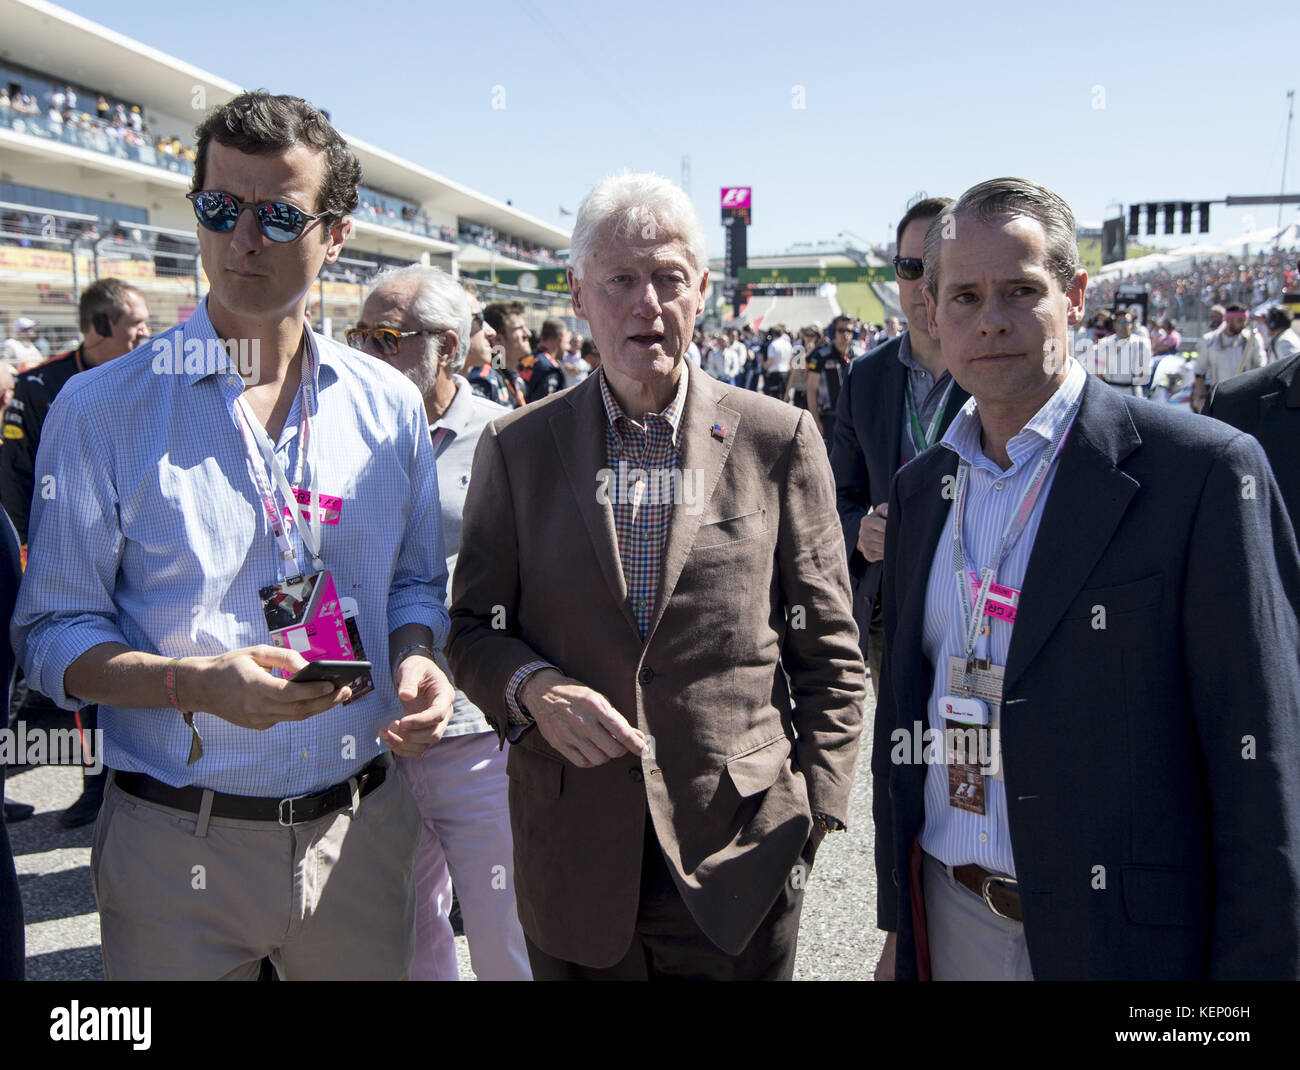 Austin, Texas, USA. 22nd Oct, 2017. Former 42nd President of the United States ''BILL CLINTON'' attending Formula 1 in Austin, walking the grid. Credit: Hoss Mcbain/ZUMA Wire/Alamy Live News Stock Photo